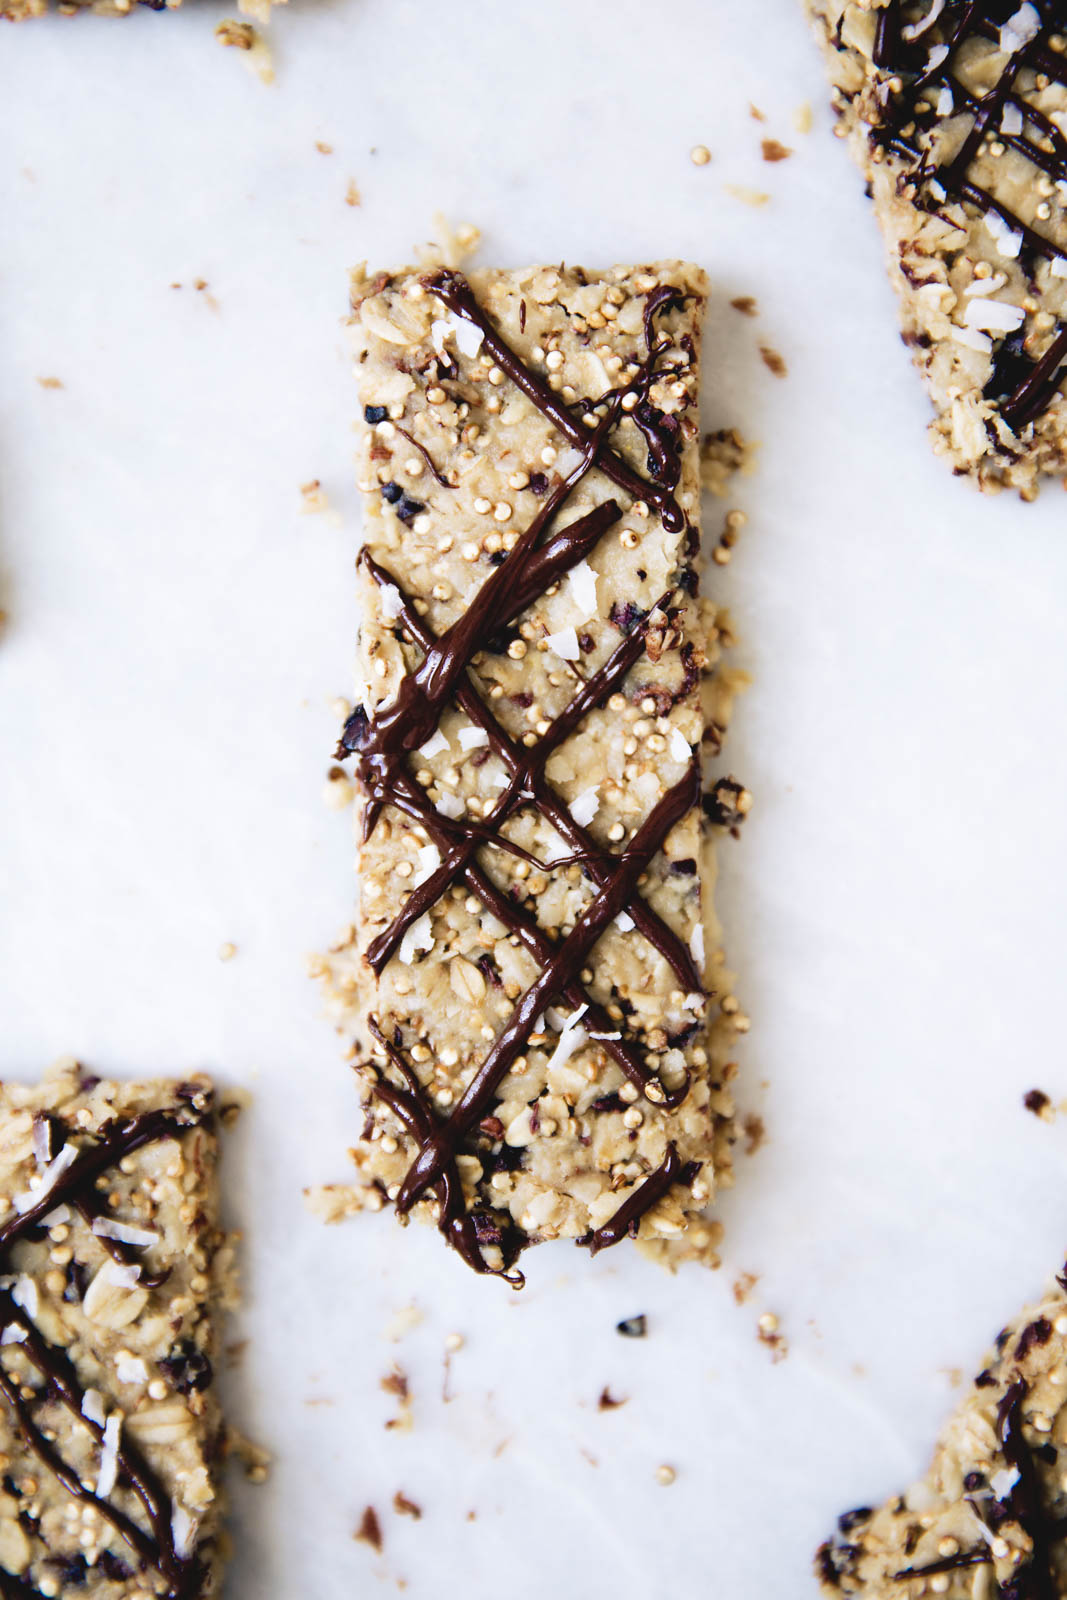 Raw, vegan, refined sugar free, and yet somehow still tasting like dessert, these raw tahini granola bars are THE next best thing!